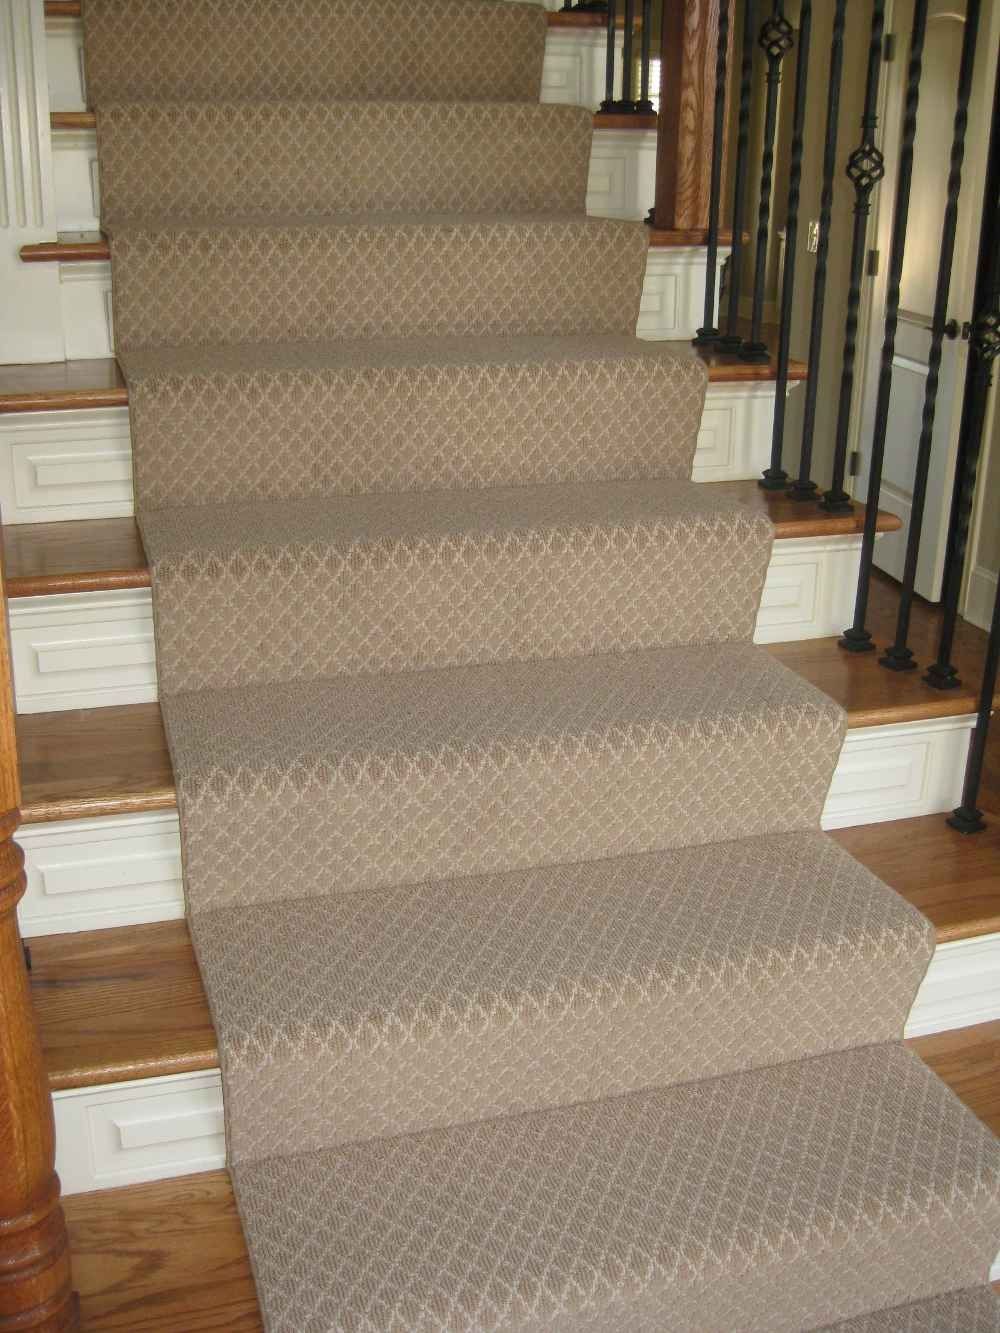 Keep Plastic Carpet Runners For Stairs Interior Home Design In Carpet Runners For Stairs And Hallways (Photo 11 of 20)